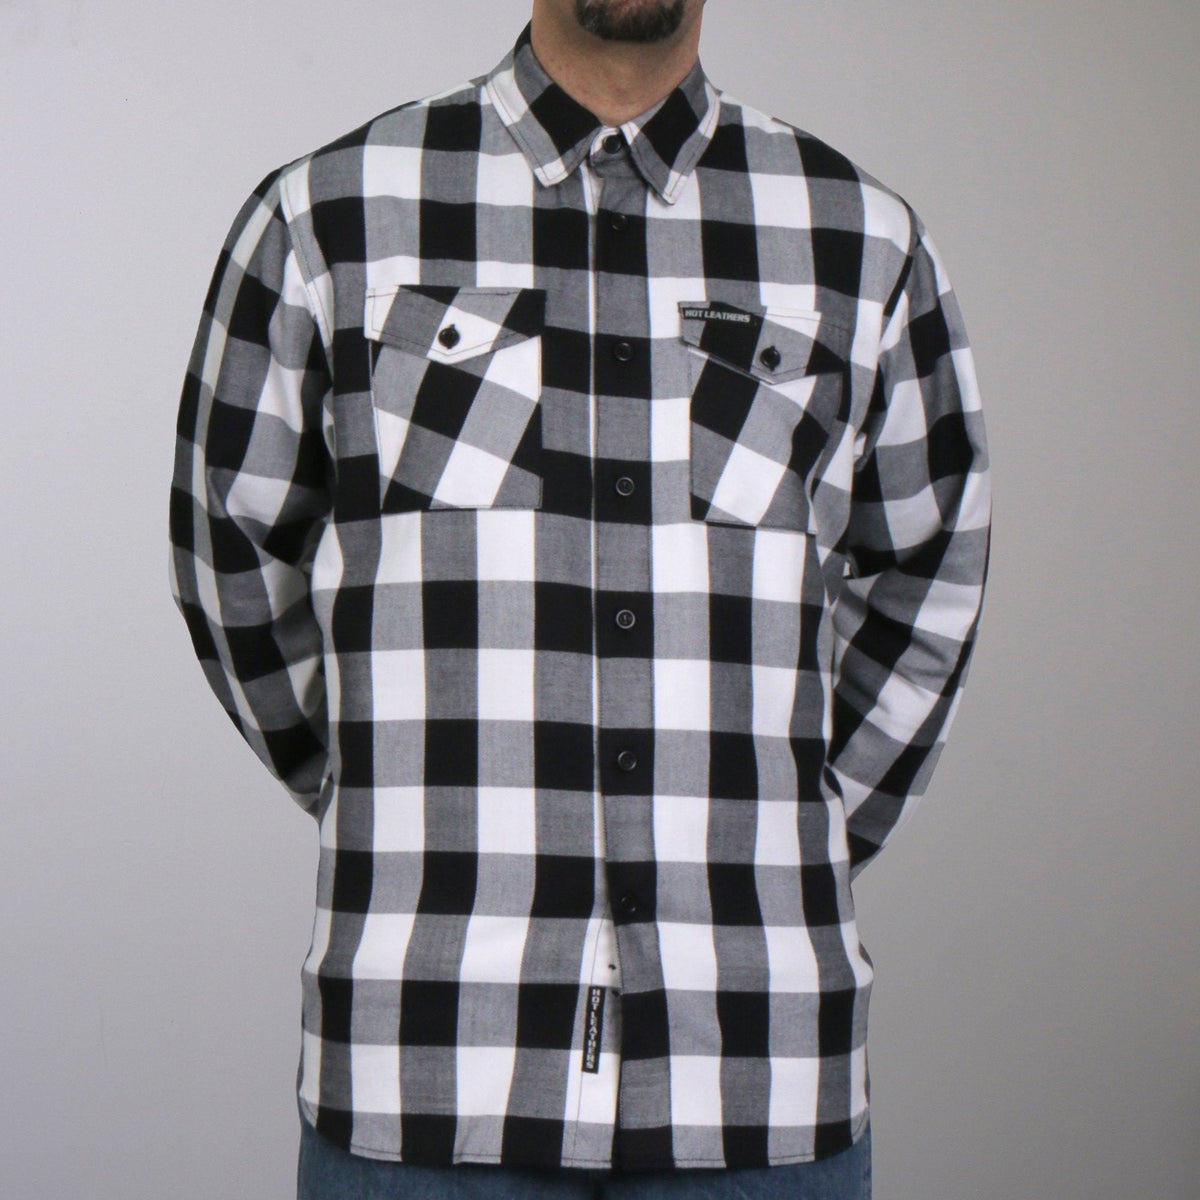 Hot Leathers FLM2004 Mens Black and White Long Sleeve Flannel Shirt